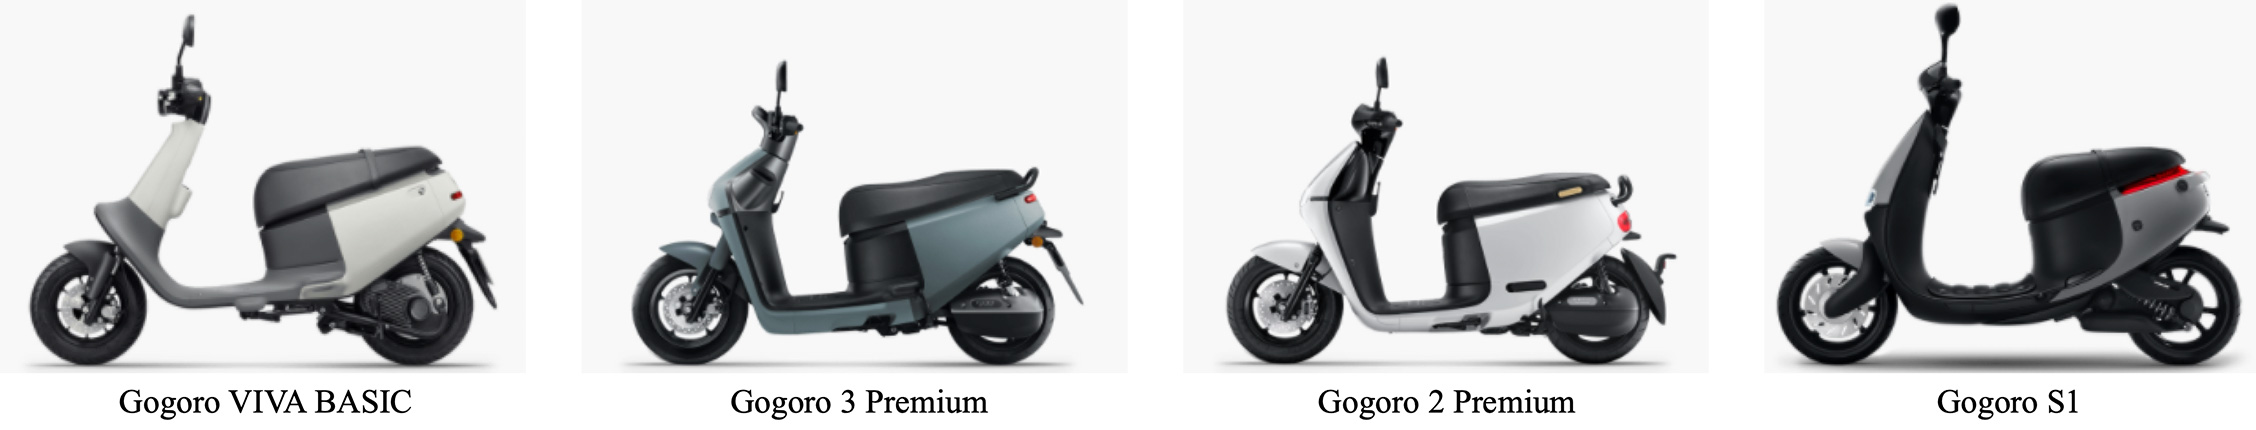 Gogoro: Specifications of Core Products